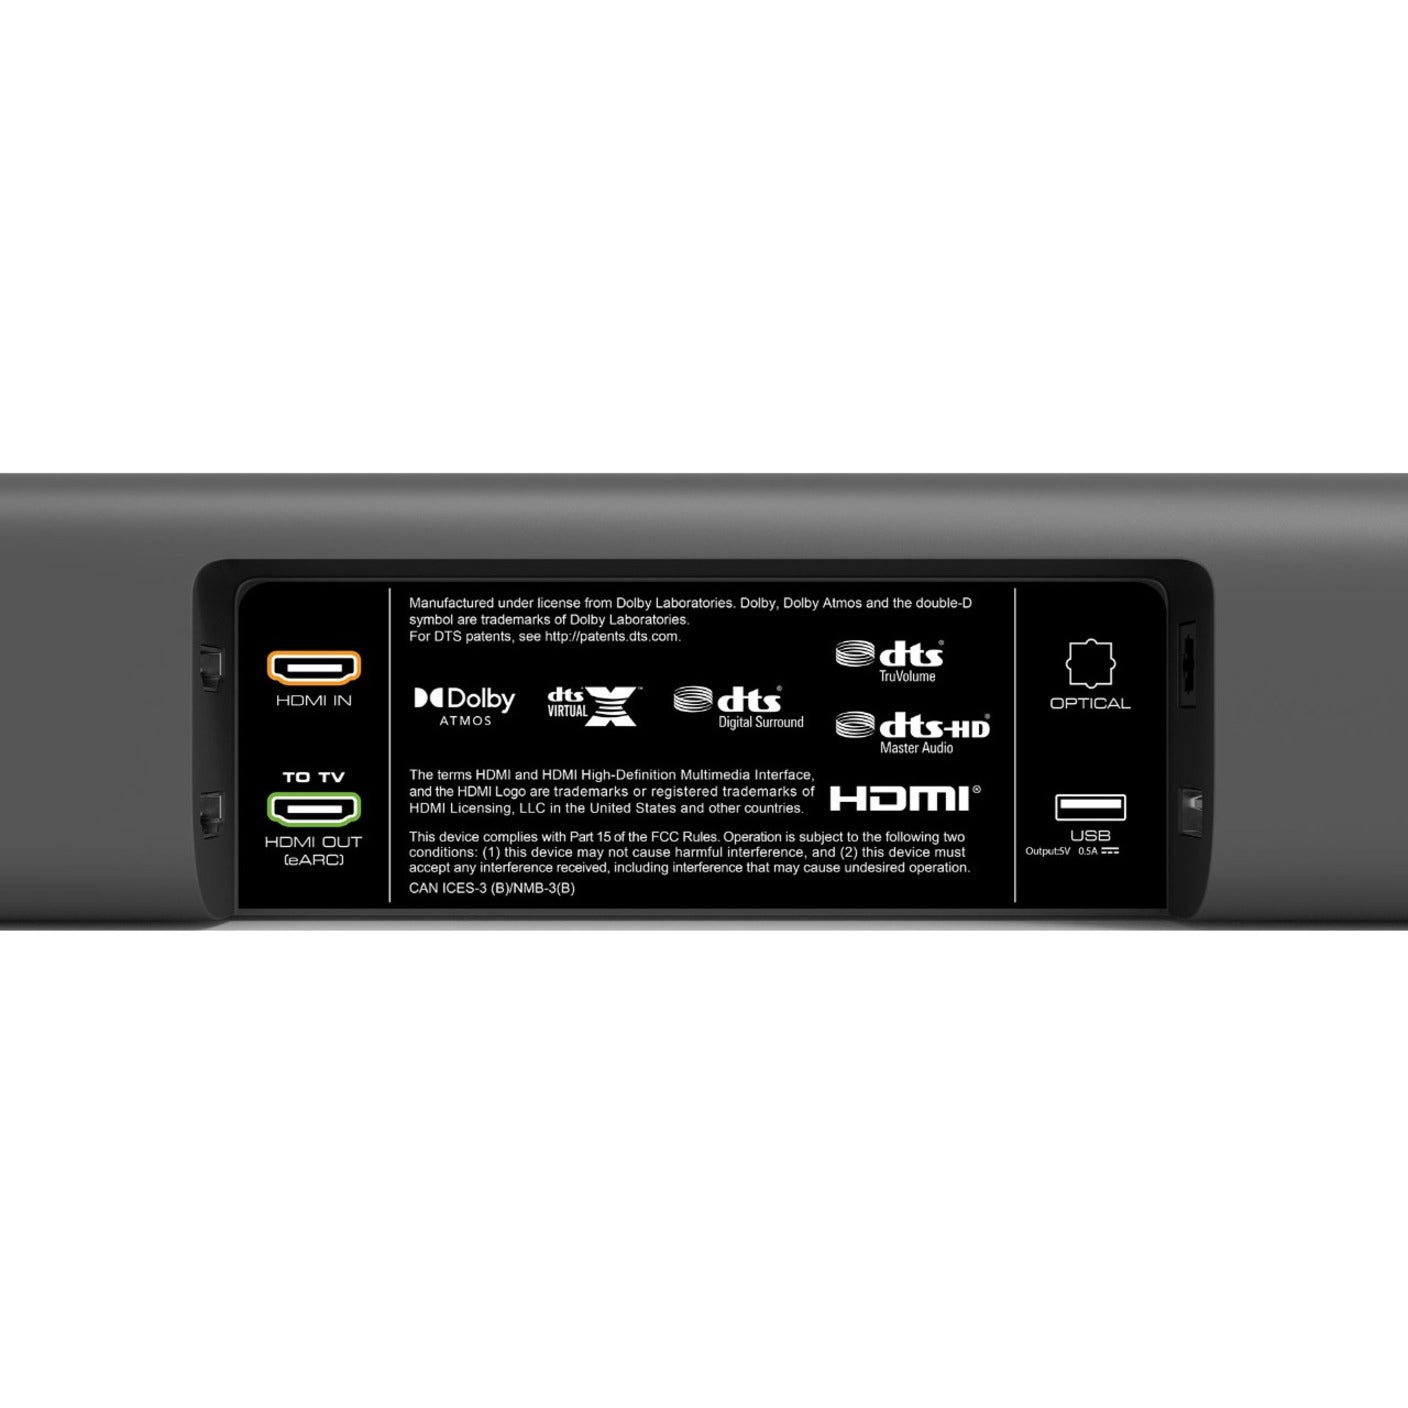 VIZIO M51AX-J6 M-Series 5.1 Home Theater Sound Bar with Dolby Atmos and DTS:X, Wireless Subwoofer, Surround Sound